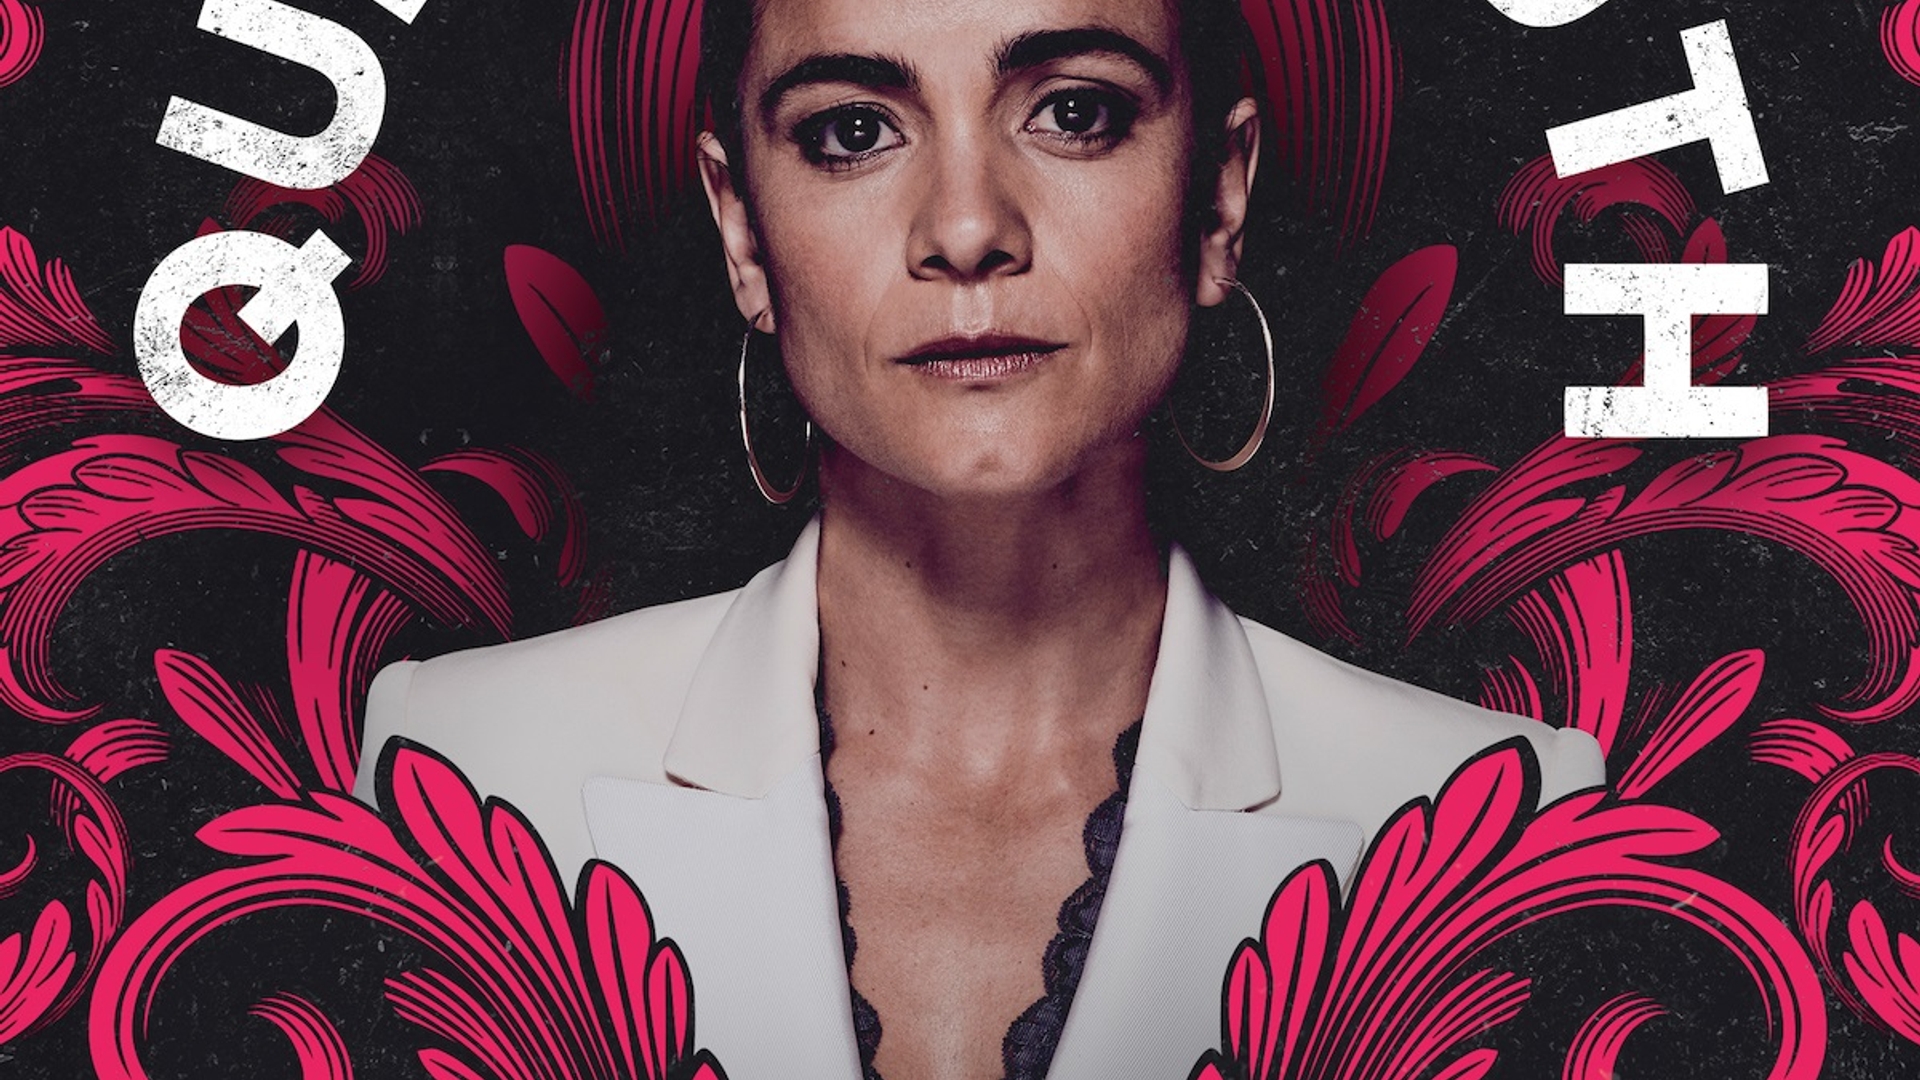 Queen of the South S05